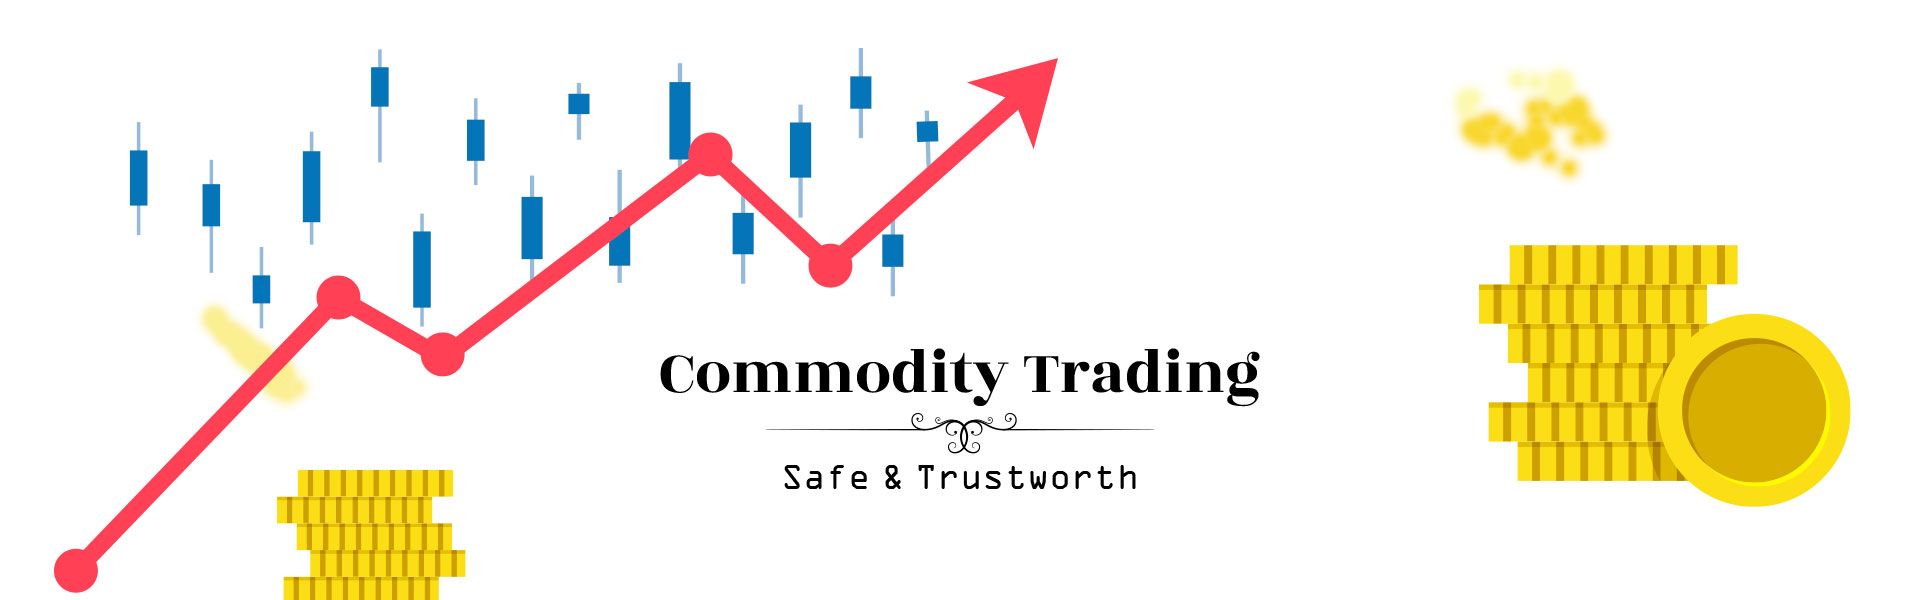 commodity-banner